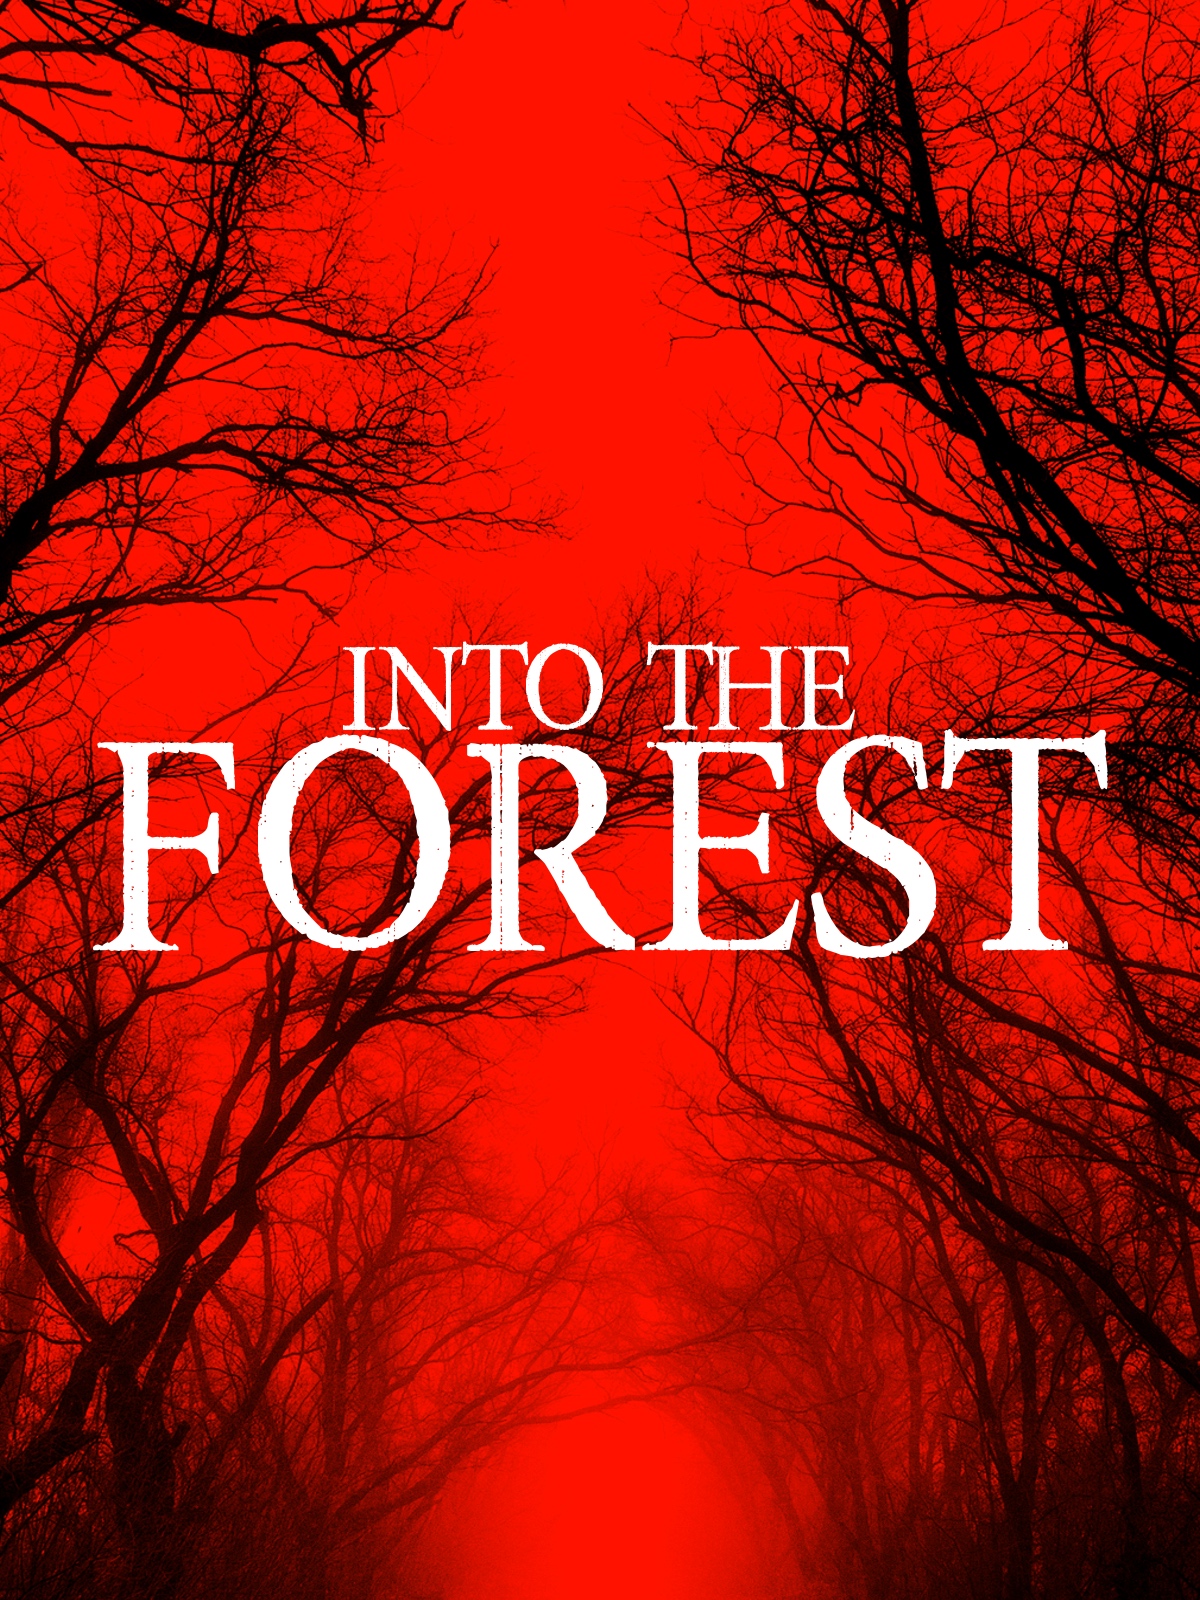 Into the Forest (2019) Screenshot 1